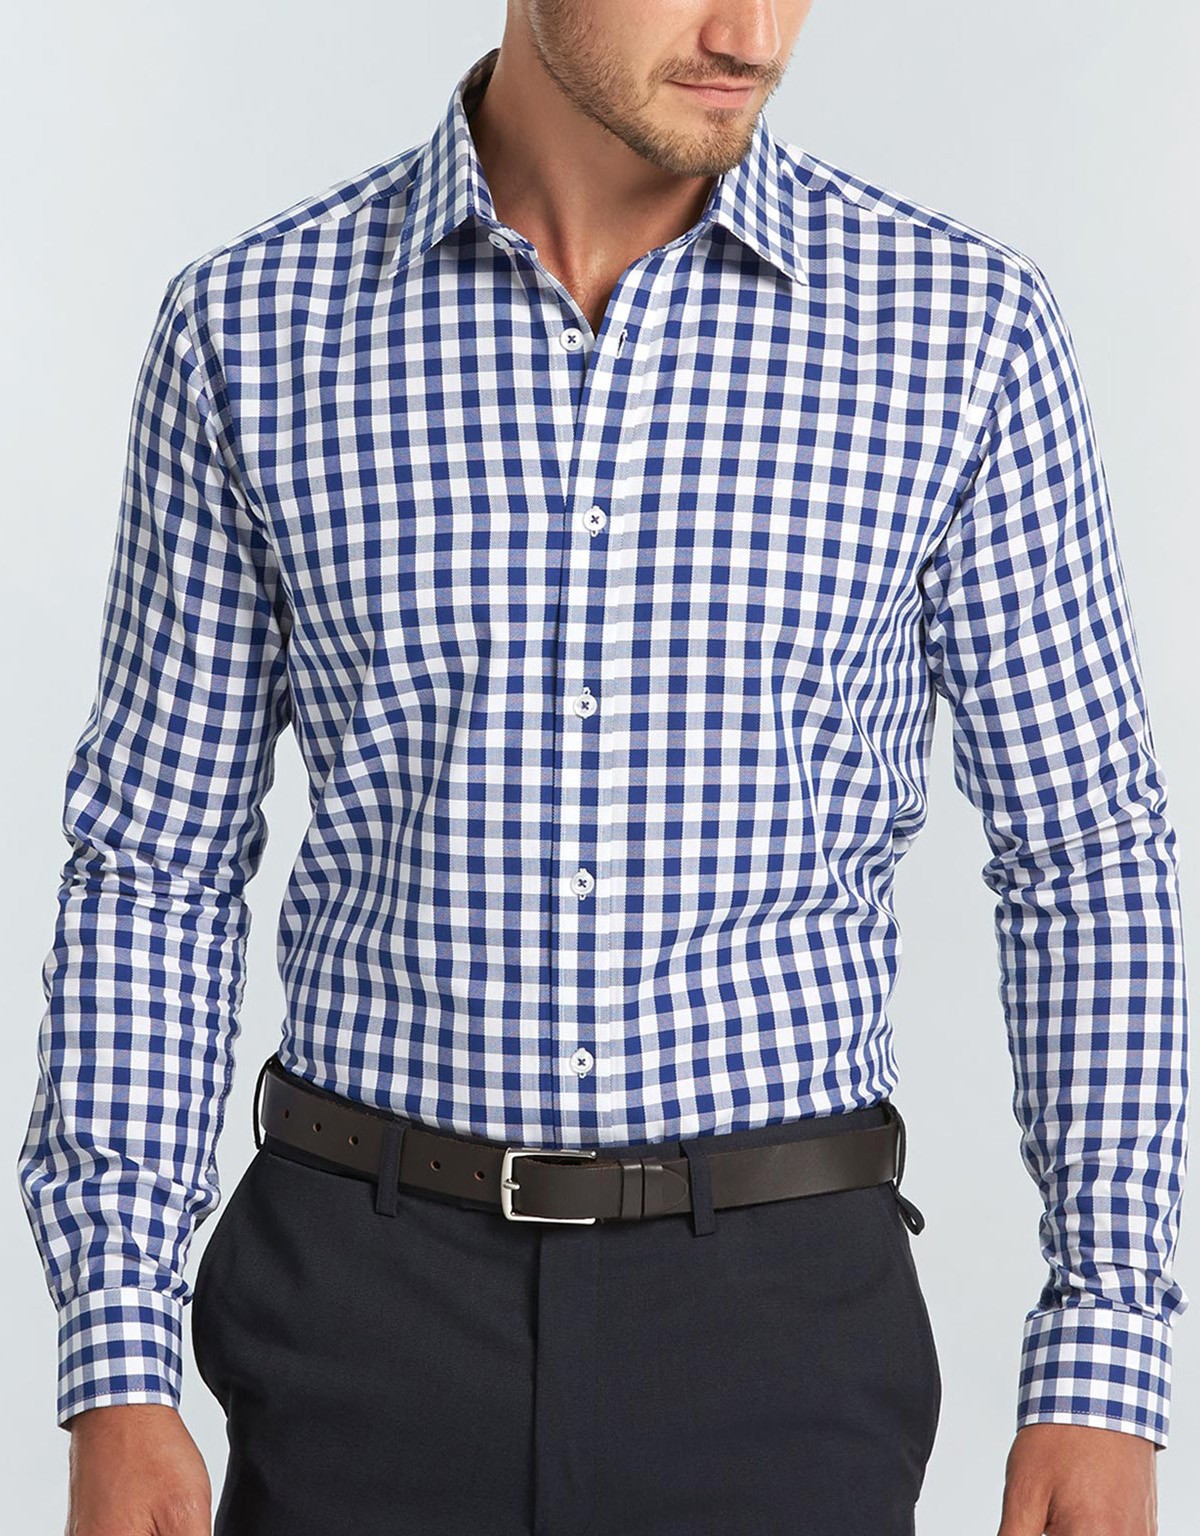 Gingham Shirt | Gingham Check Shirts Online | Save up to 25%